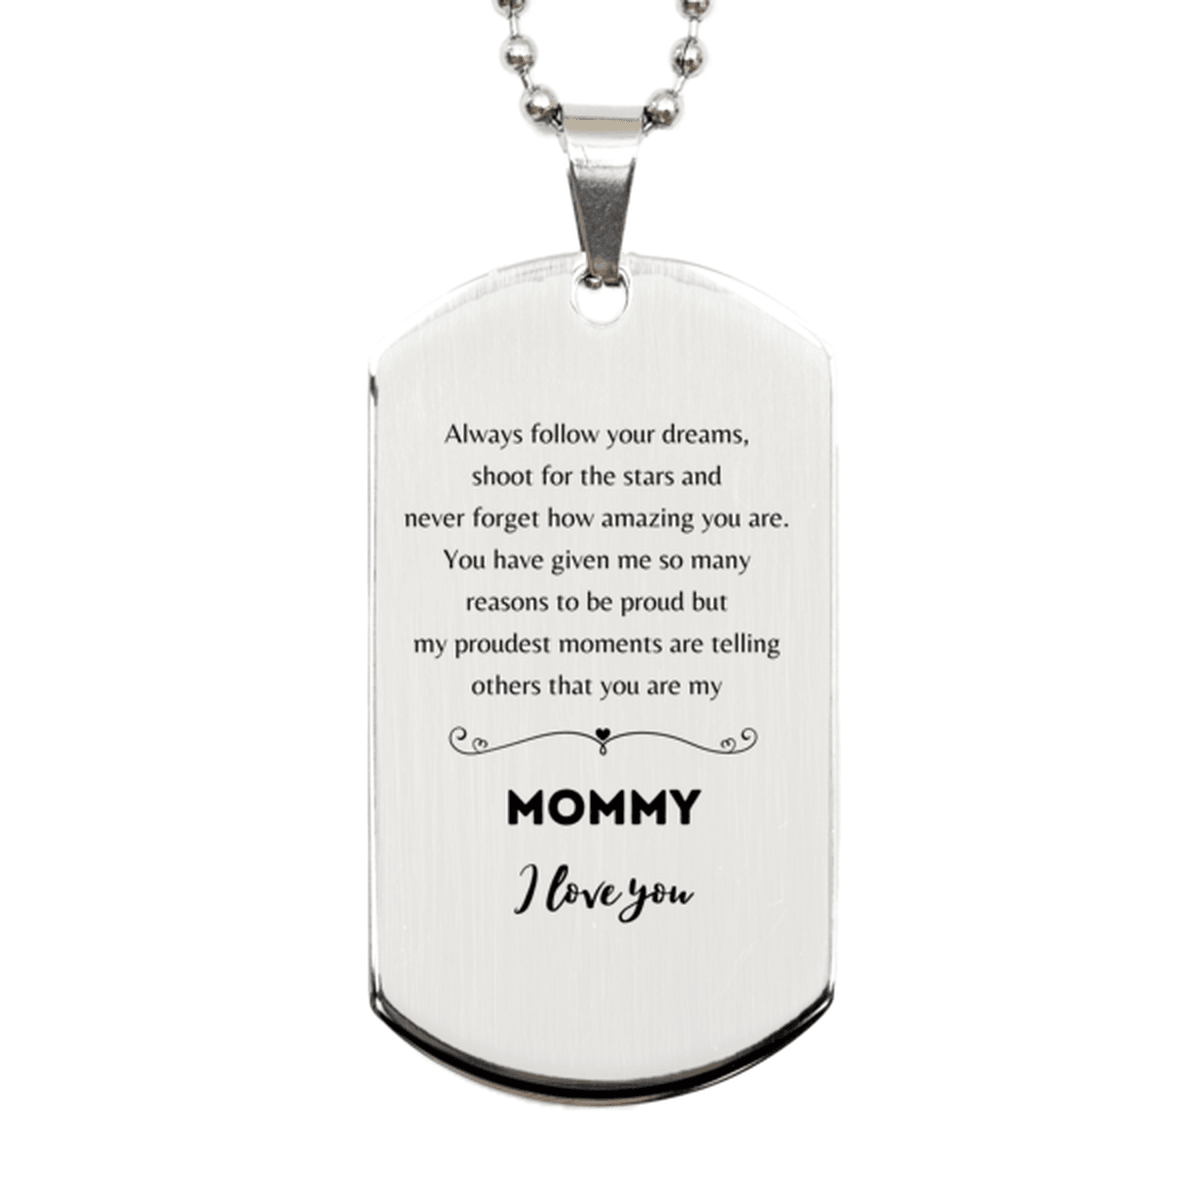 Mommy Silver Dog Tag Engraved Necklace - Always Follow your Dreams - Birthday, Christmas Holiday Jewelry Gift - Mallard Moon Gift Shop